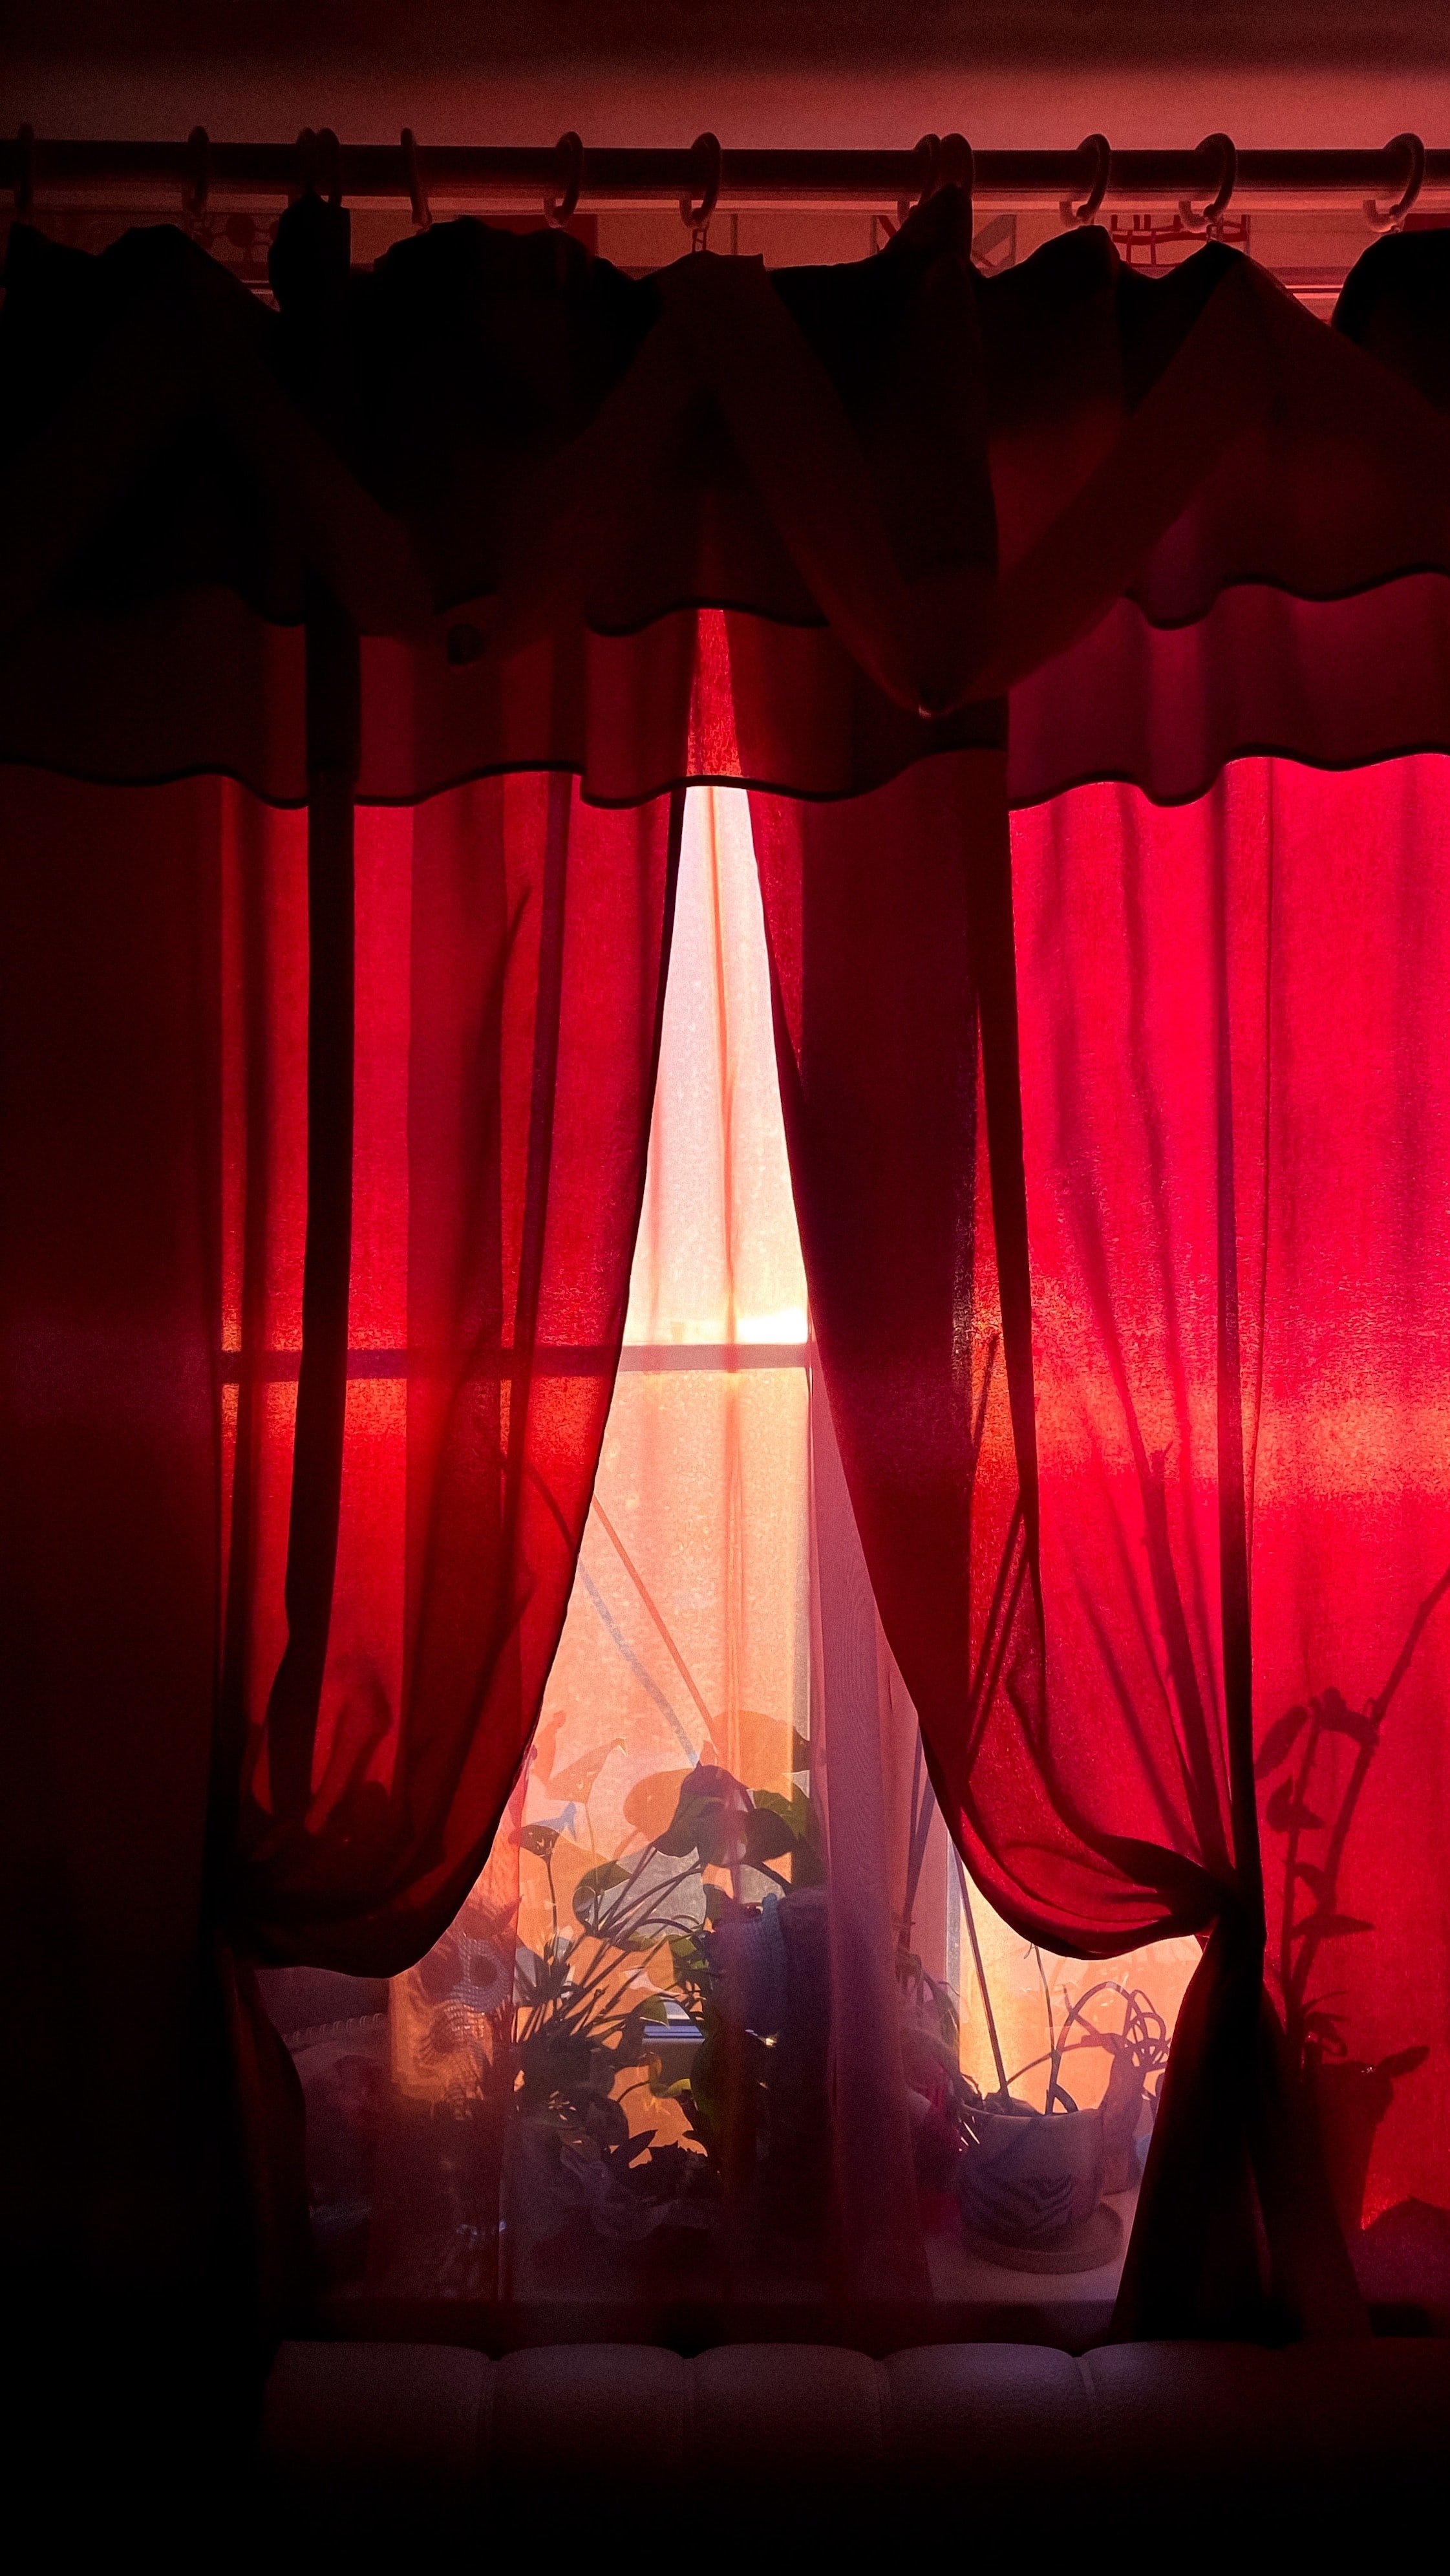 Adam described the room with the red curtain. | Source: Unsplash